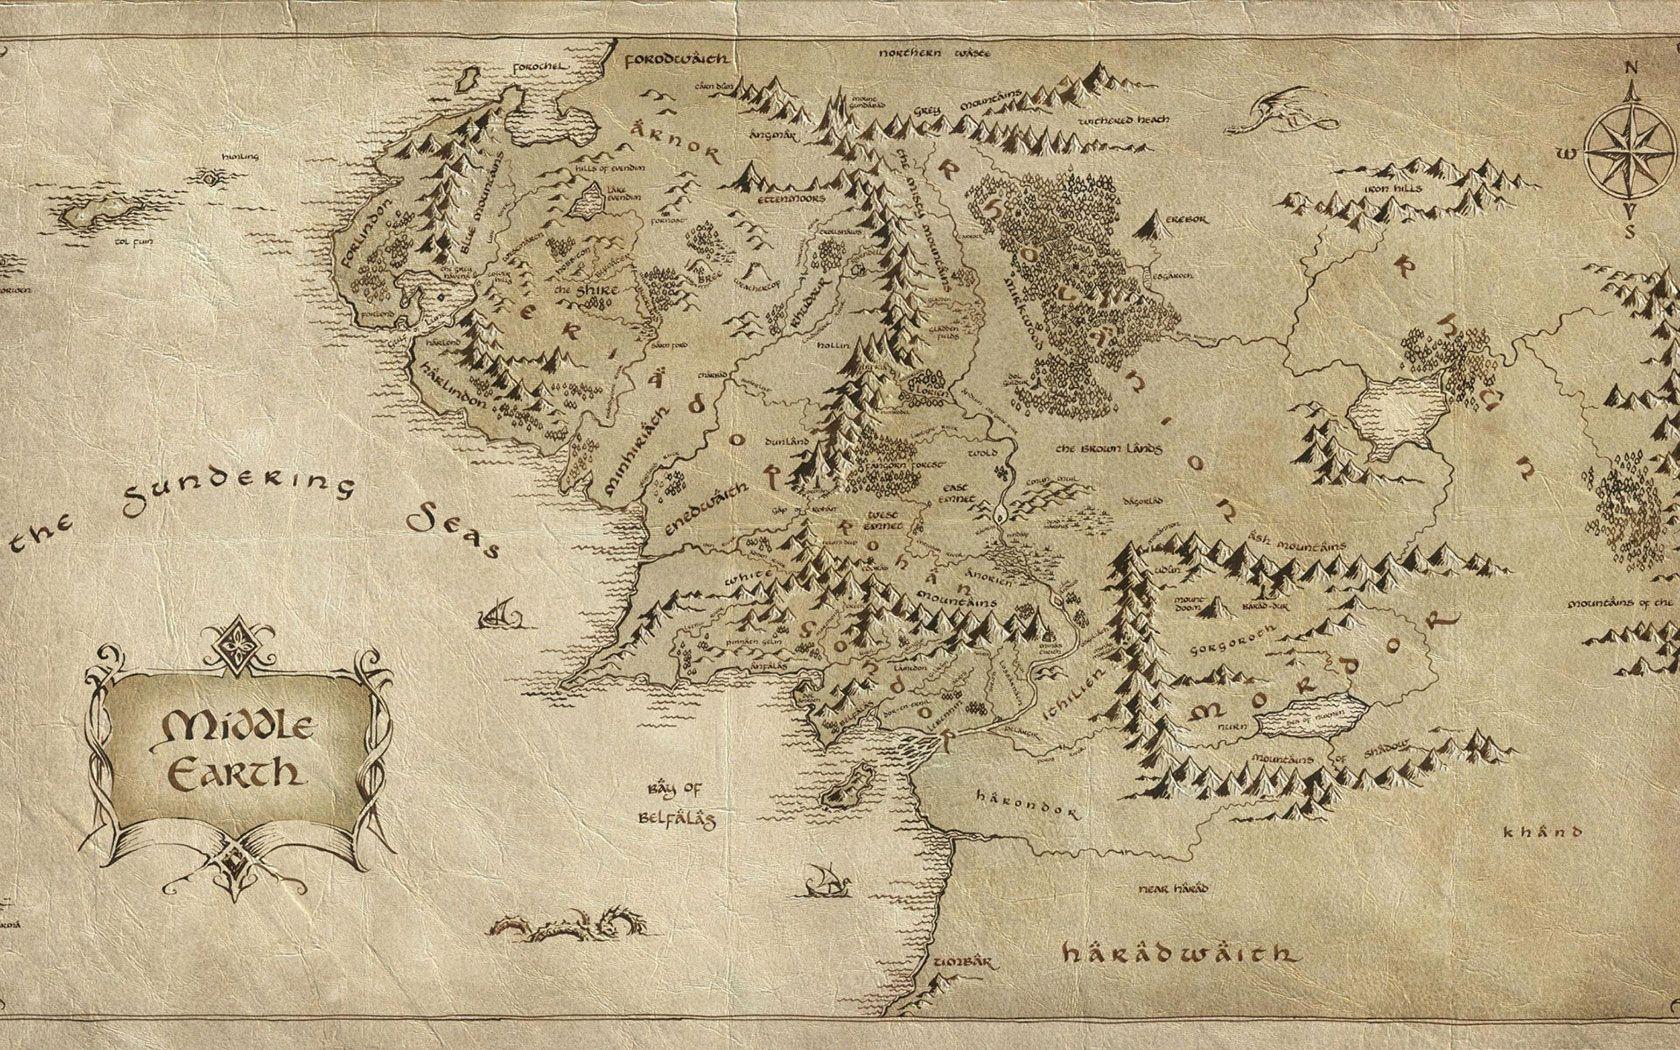 Lord of The Rings Map